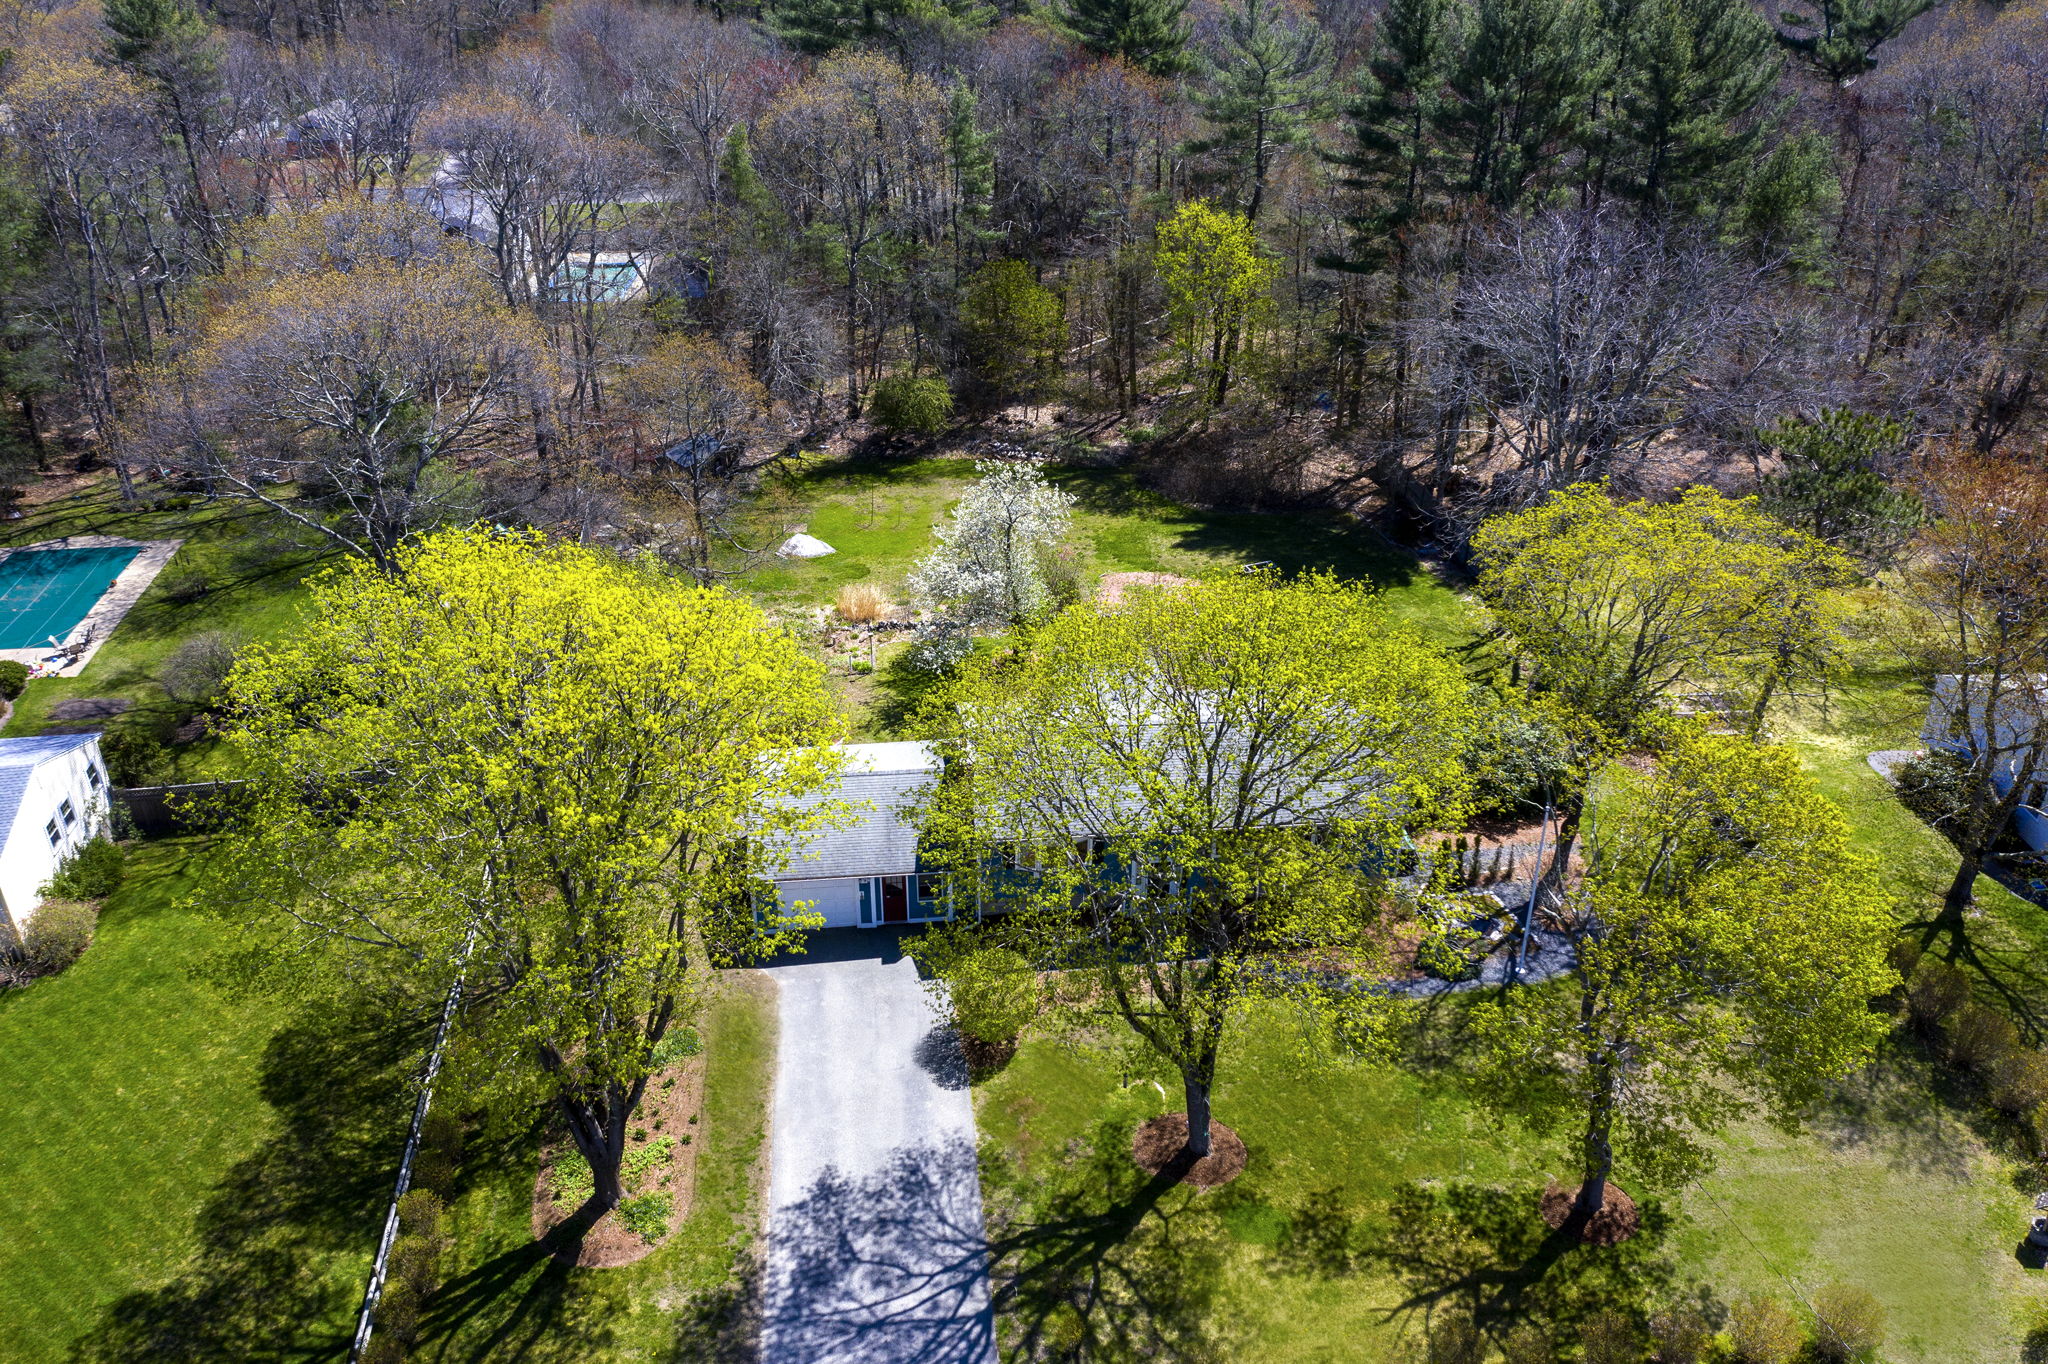  107 Twin Fawn Dr, Hanover, MA 02339, US